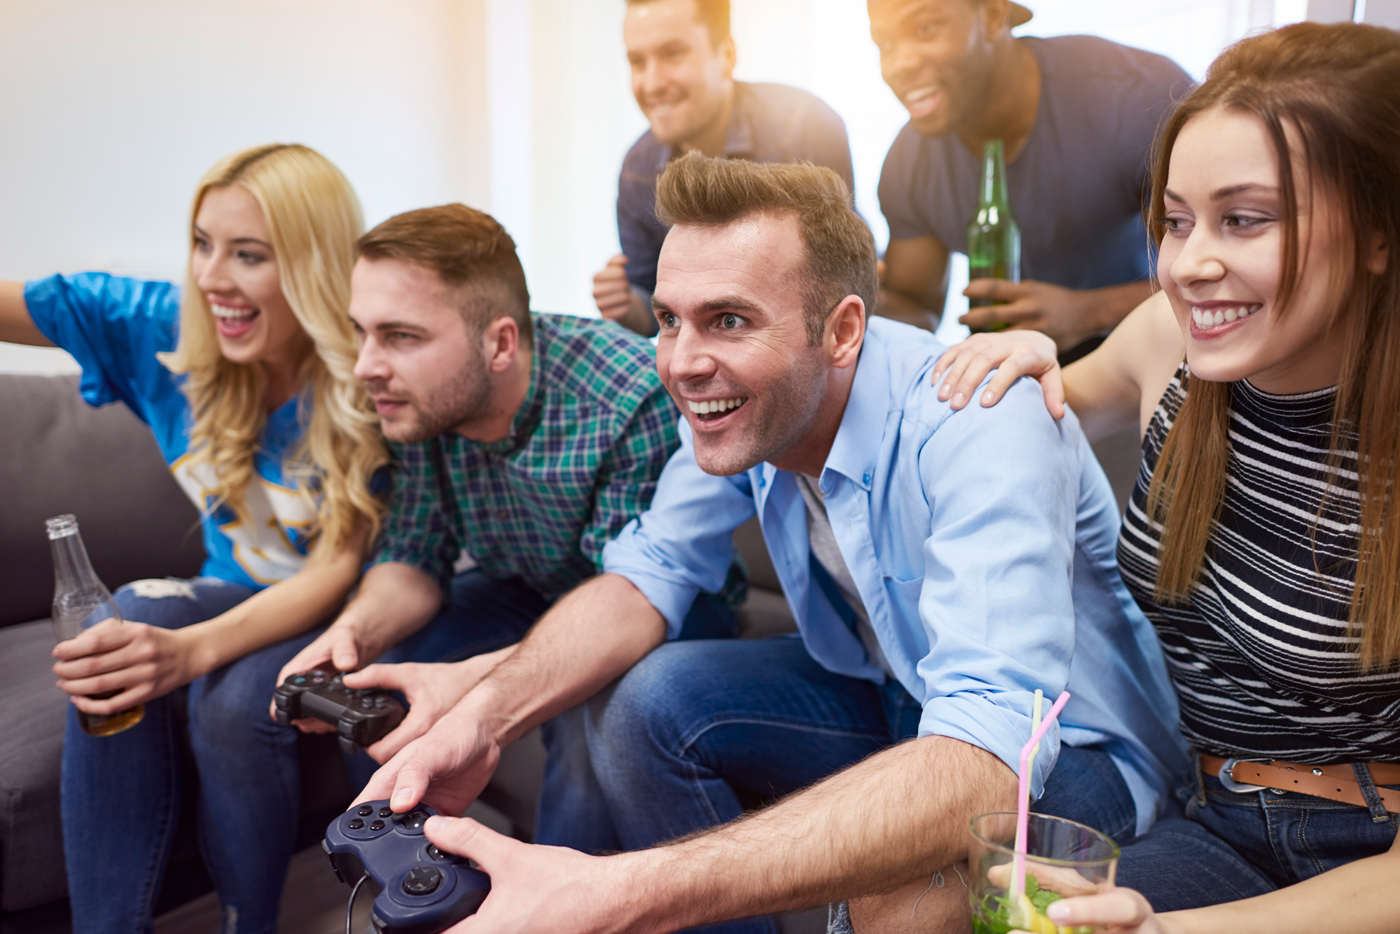 French Gaming Industry. Photo: gpointstudio via Envato Elements